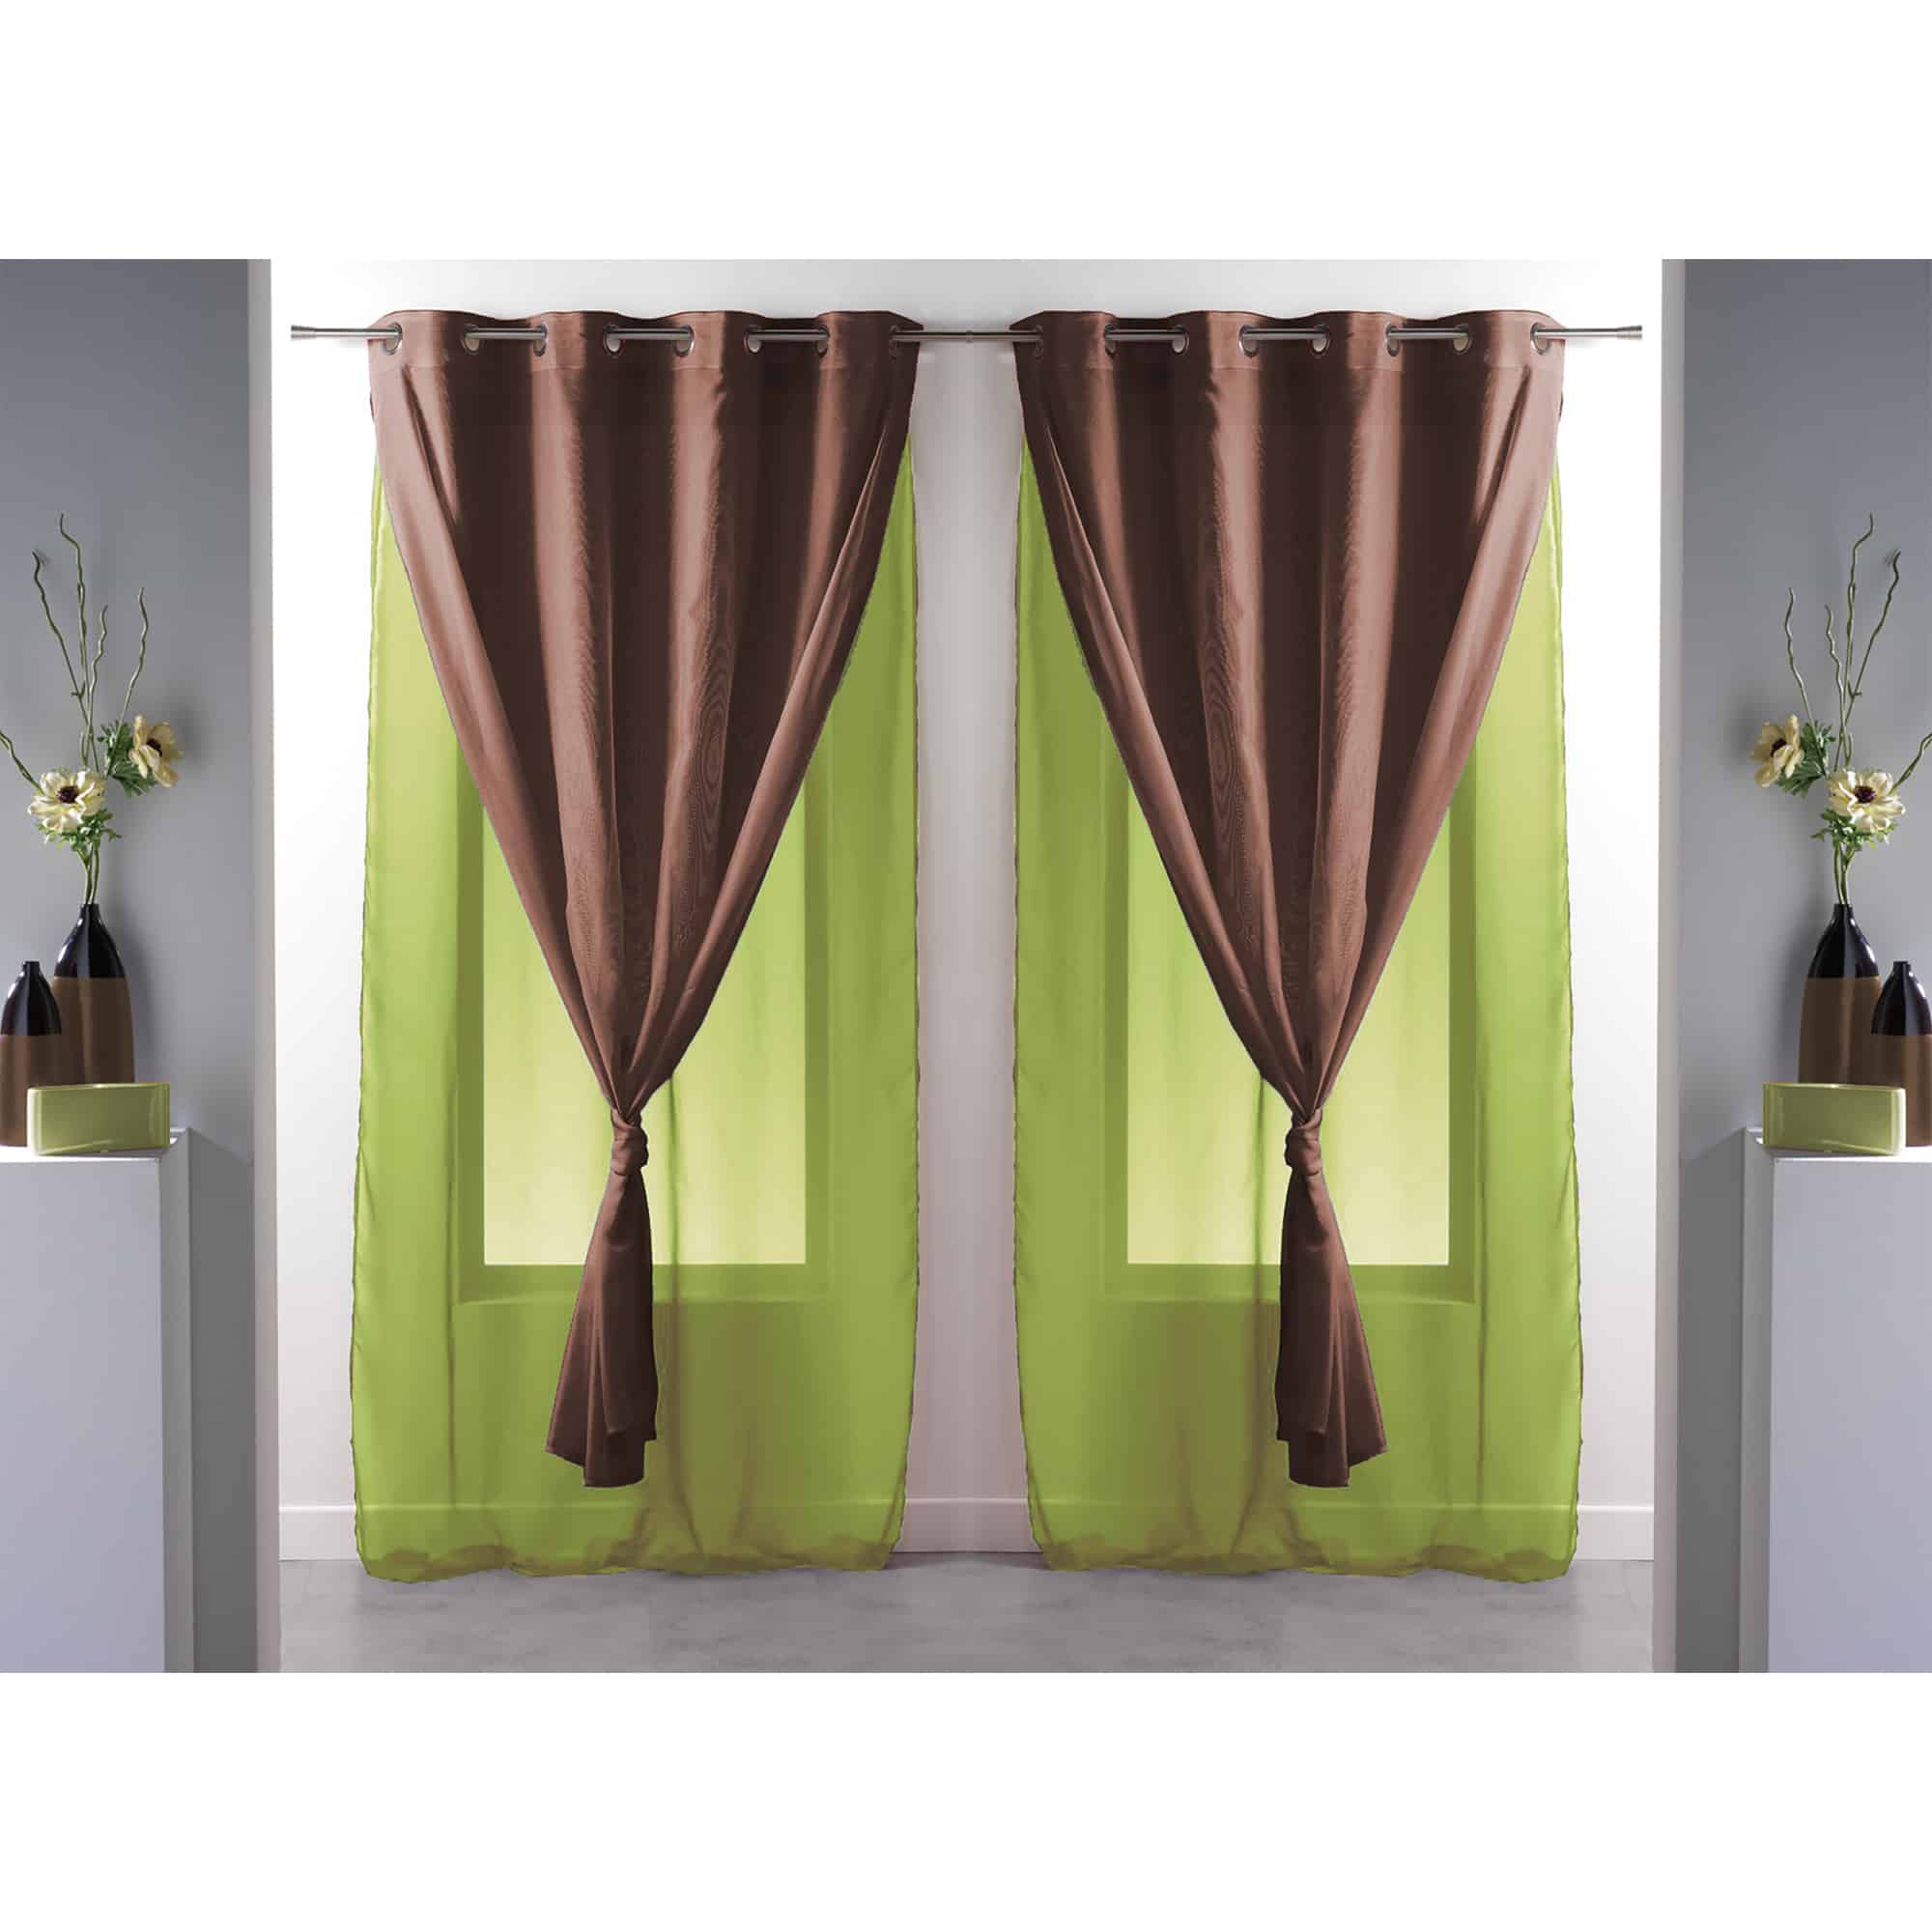 double sheer curtains solid 2 colors green brown set of 2 panels for large window